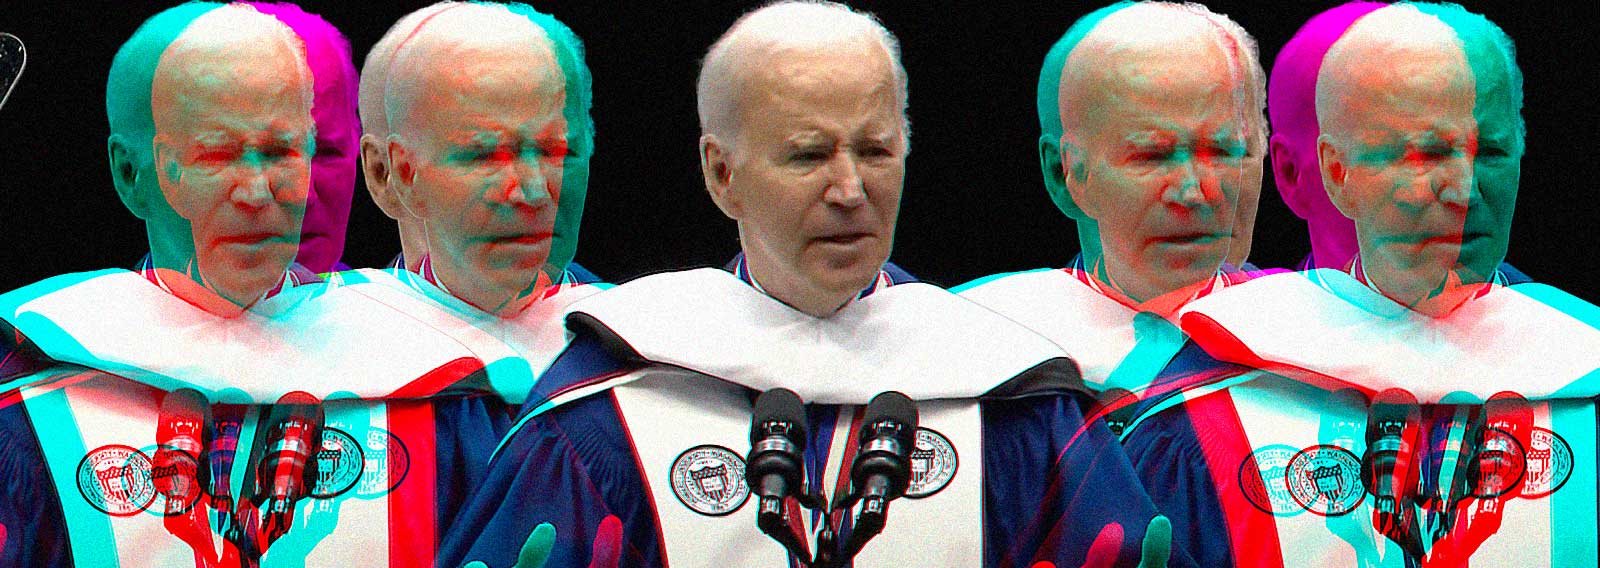 ‘Whiteness’ Crisis Disinformation: Biden Continues to Spread Lies